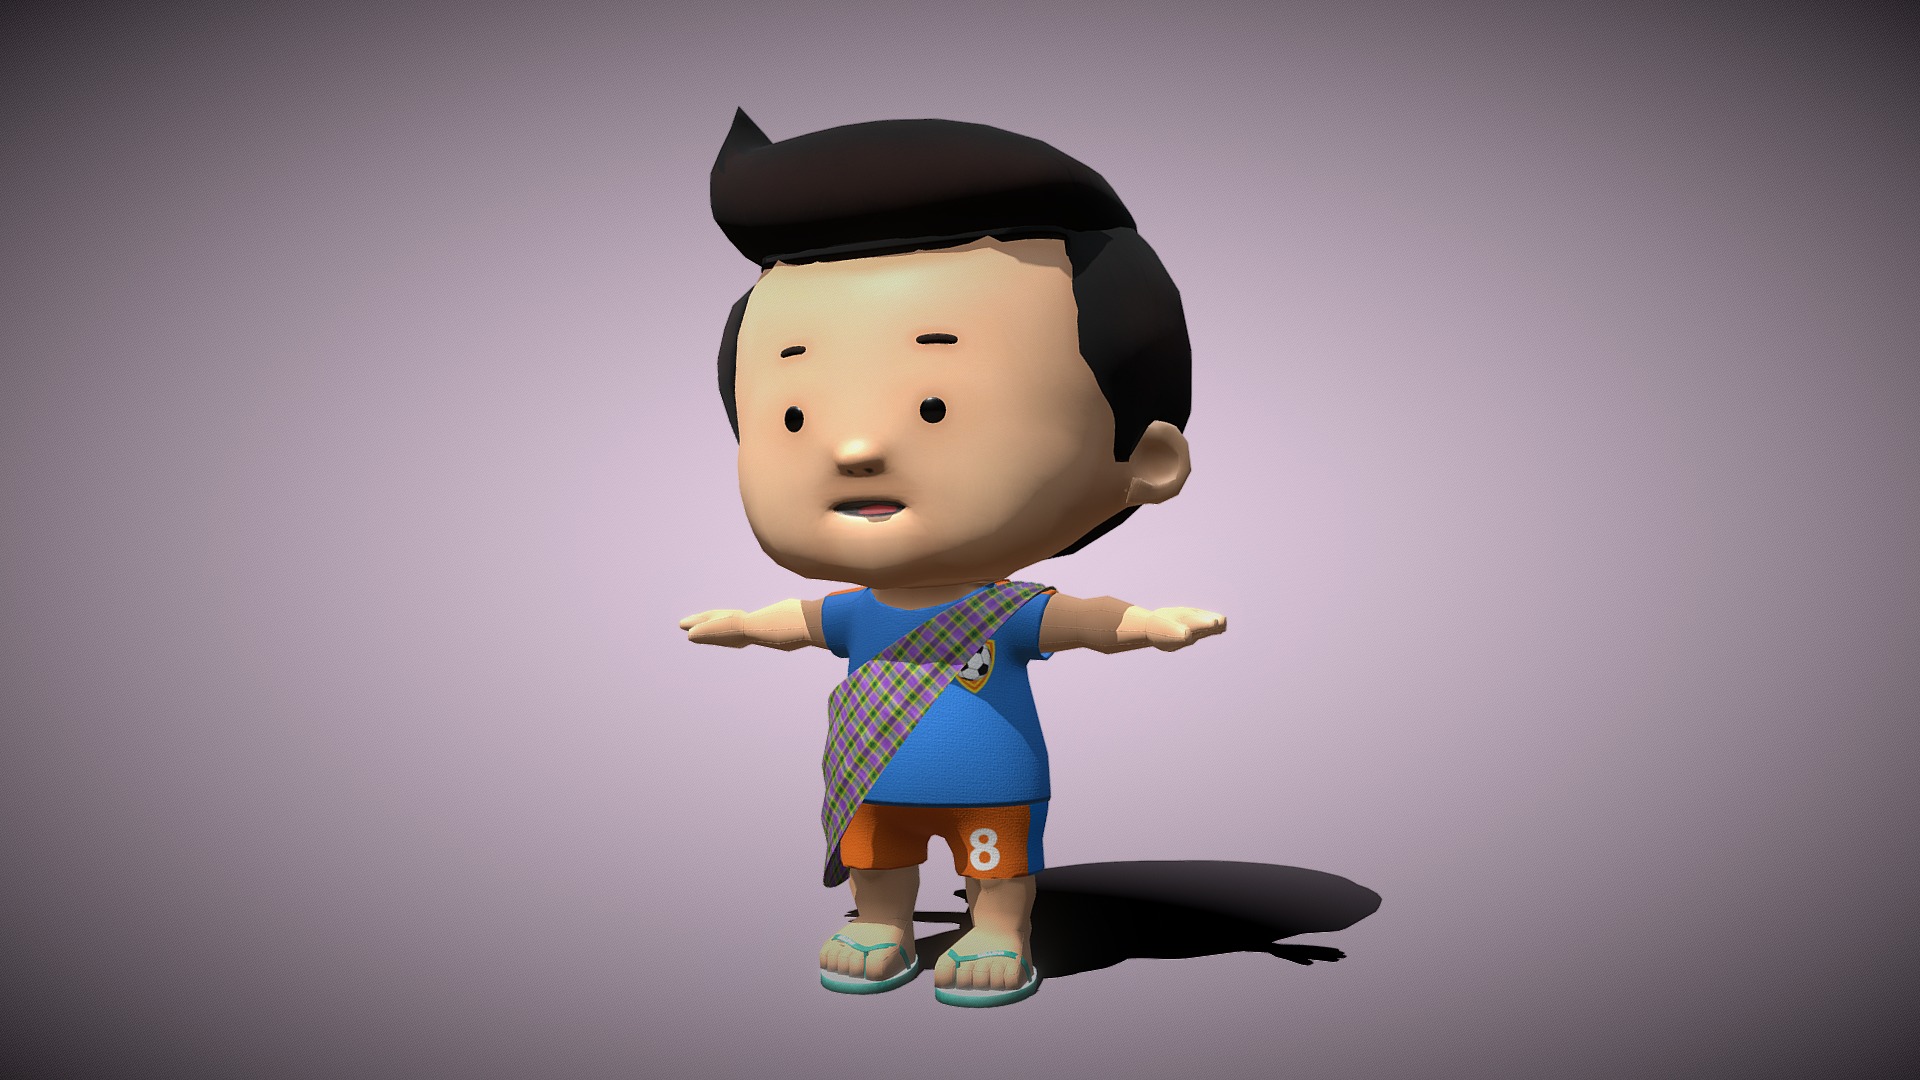 3D model zaki character - This is a 3D model of the zaki character. The 3D model is about a toy doll with a hat.